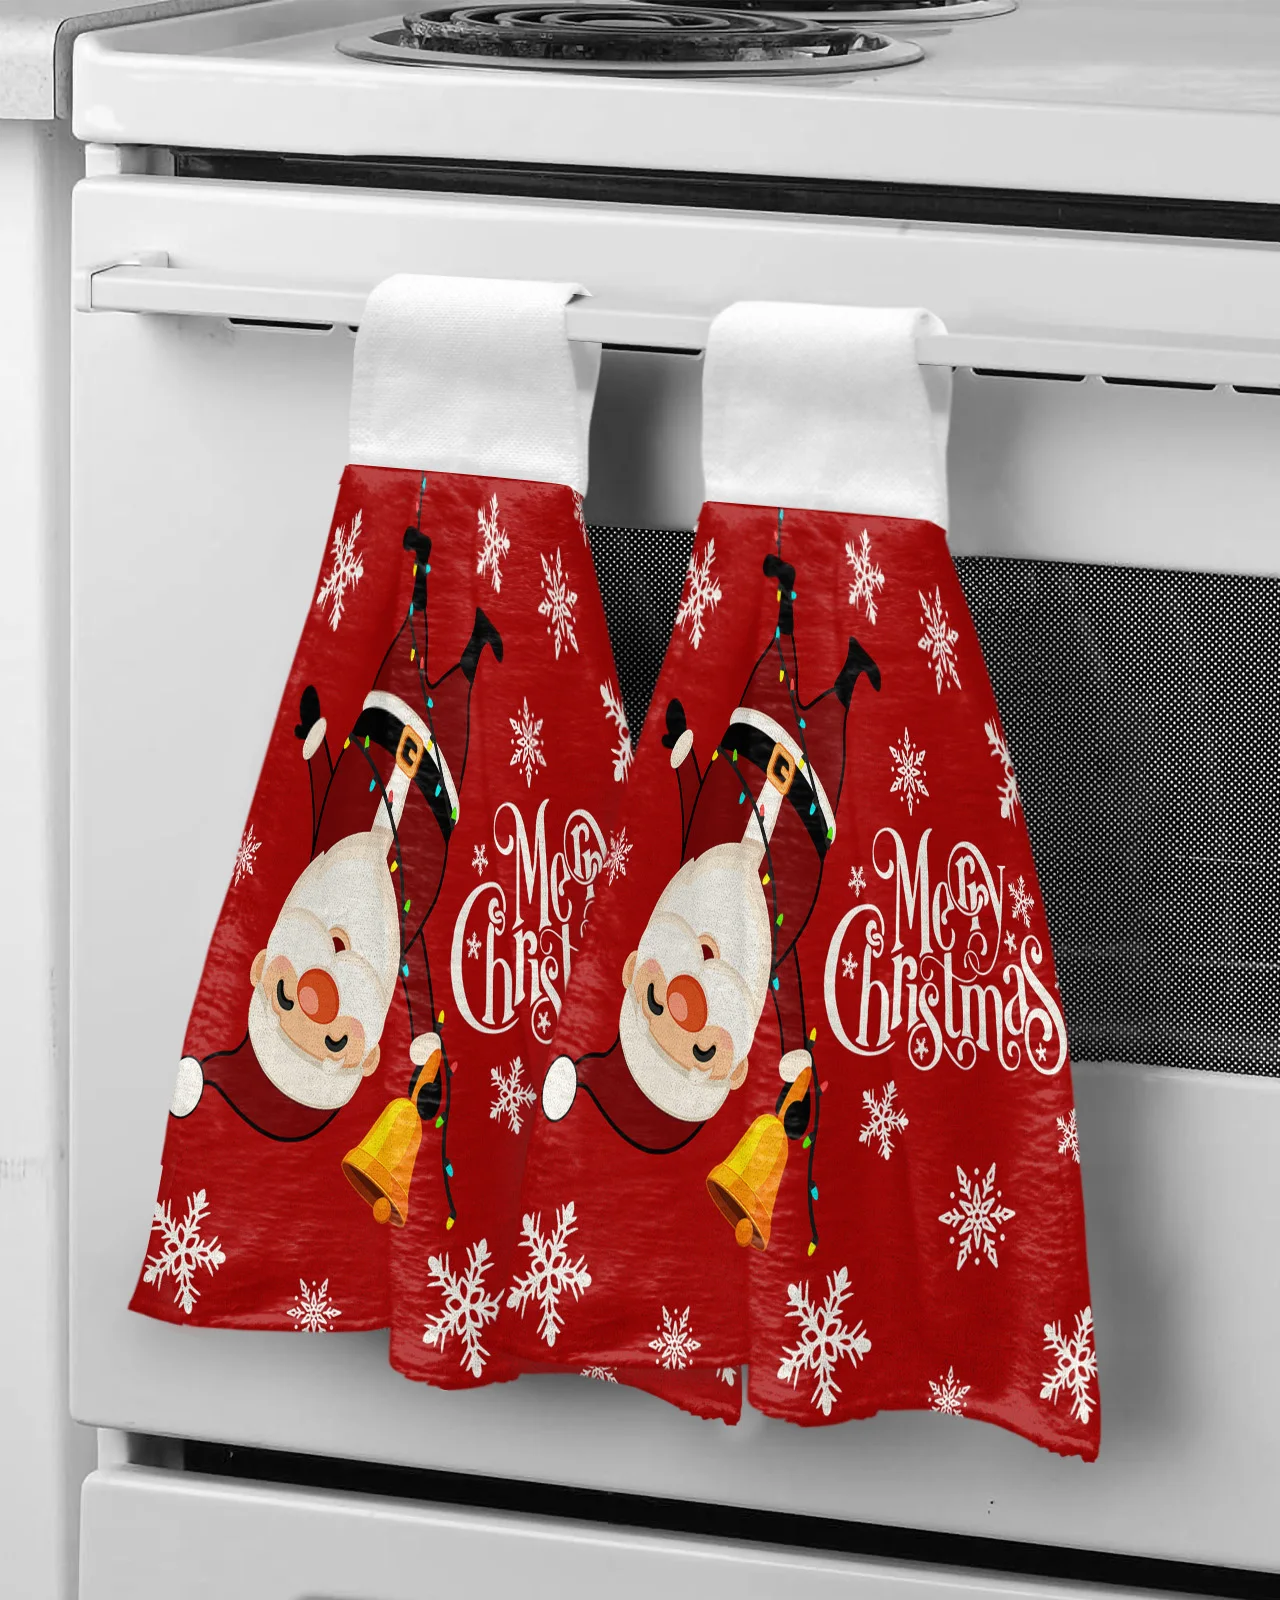 https://ae01.alicdn.com/kf/Sc5842585b4554931b6b5a8185b9d1631q/Christmas-Santa-Claus-With-Snowflake-Red-Hand-Towel-Absorbent-Hanging-Towels-Home-Kitchen-Wipe-Dishcloths-Bathroom.jpg